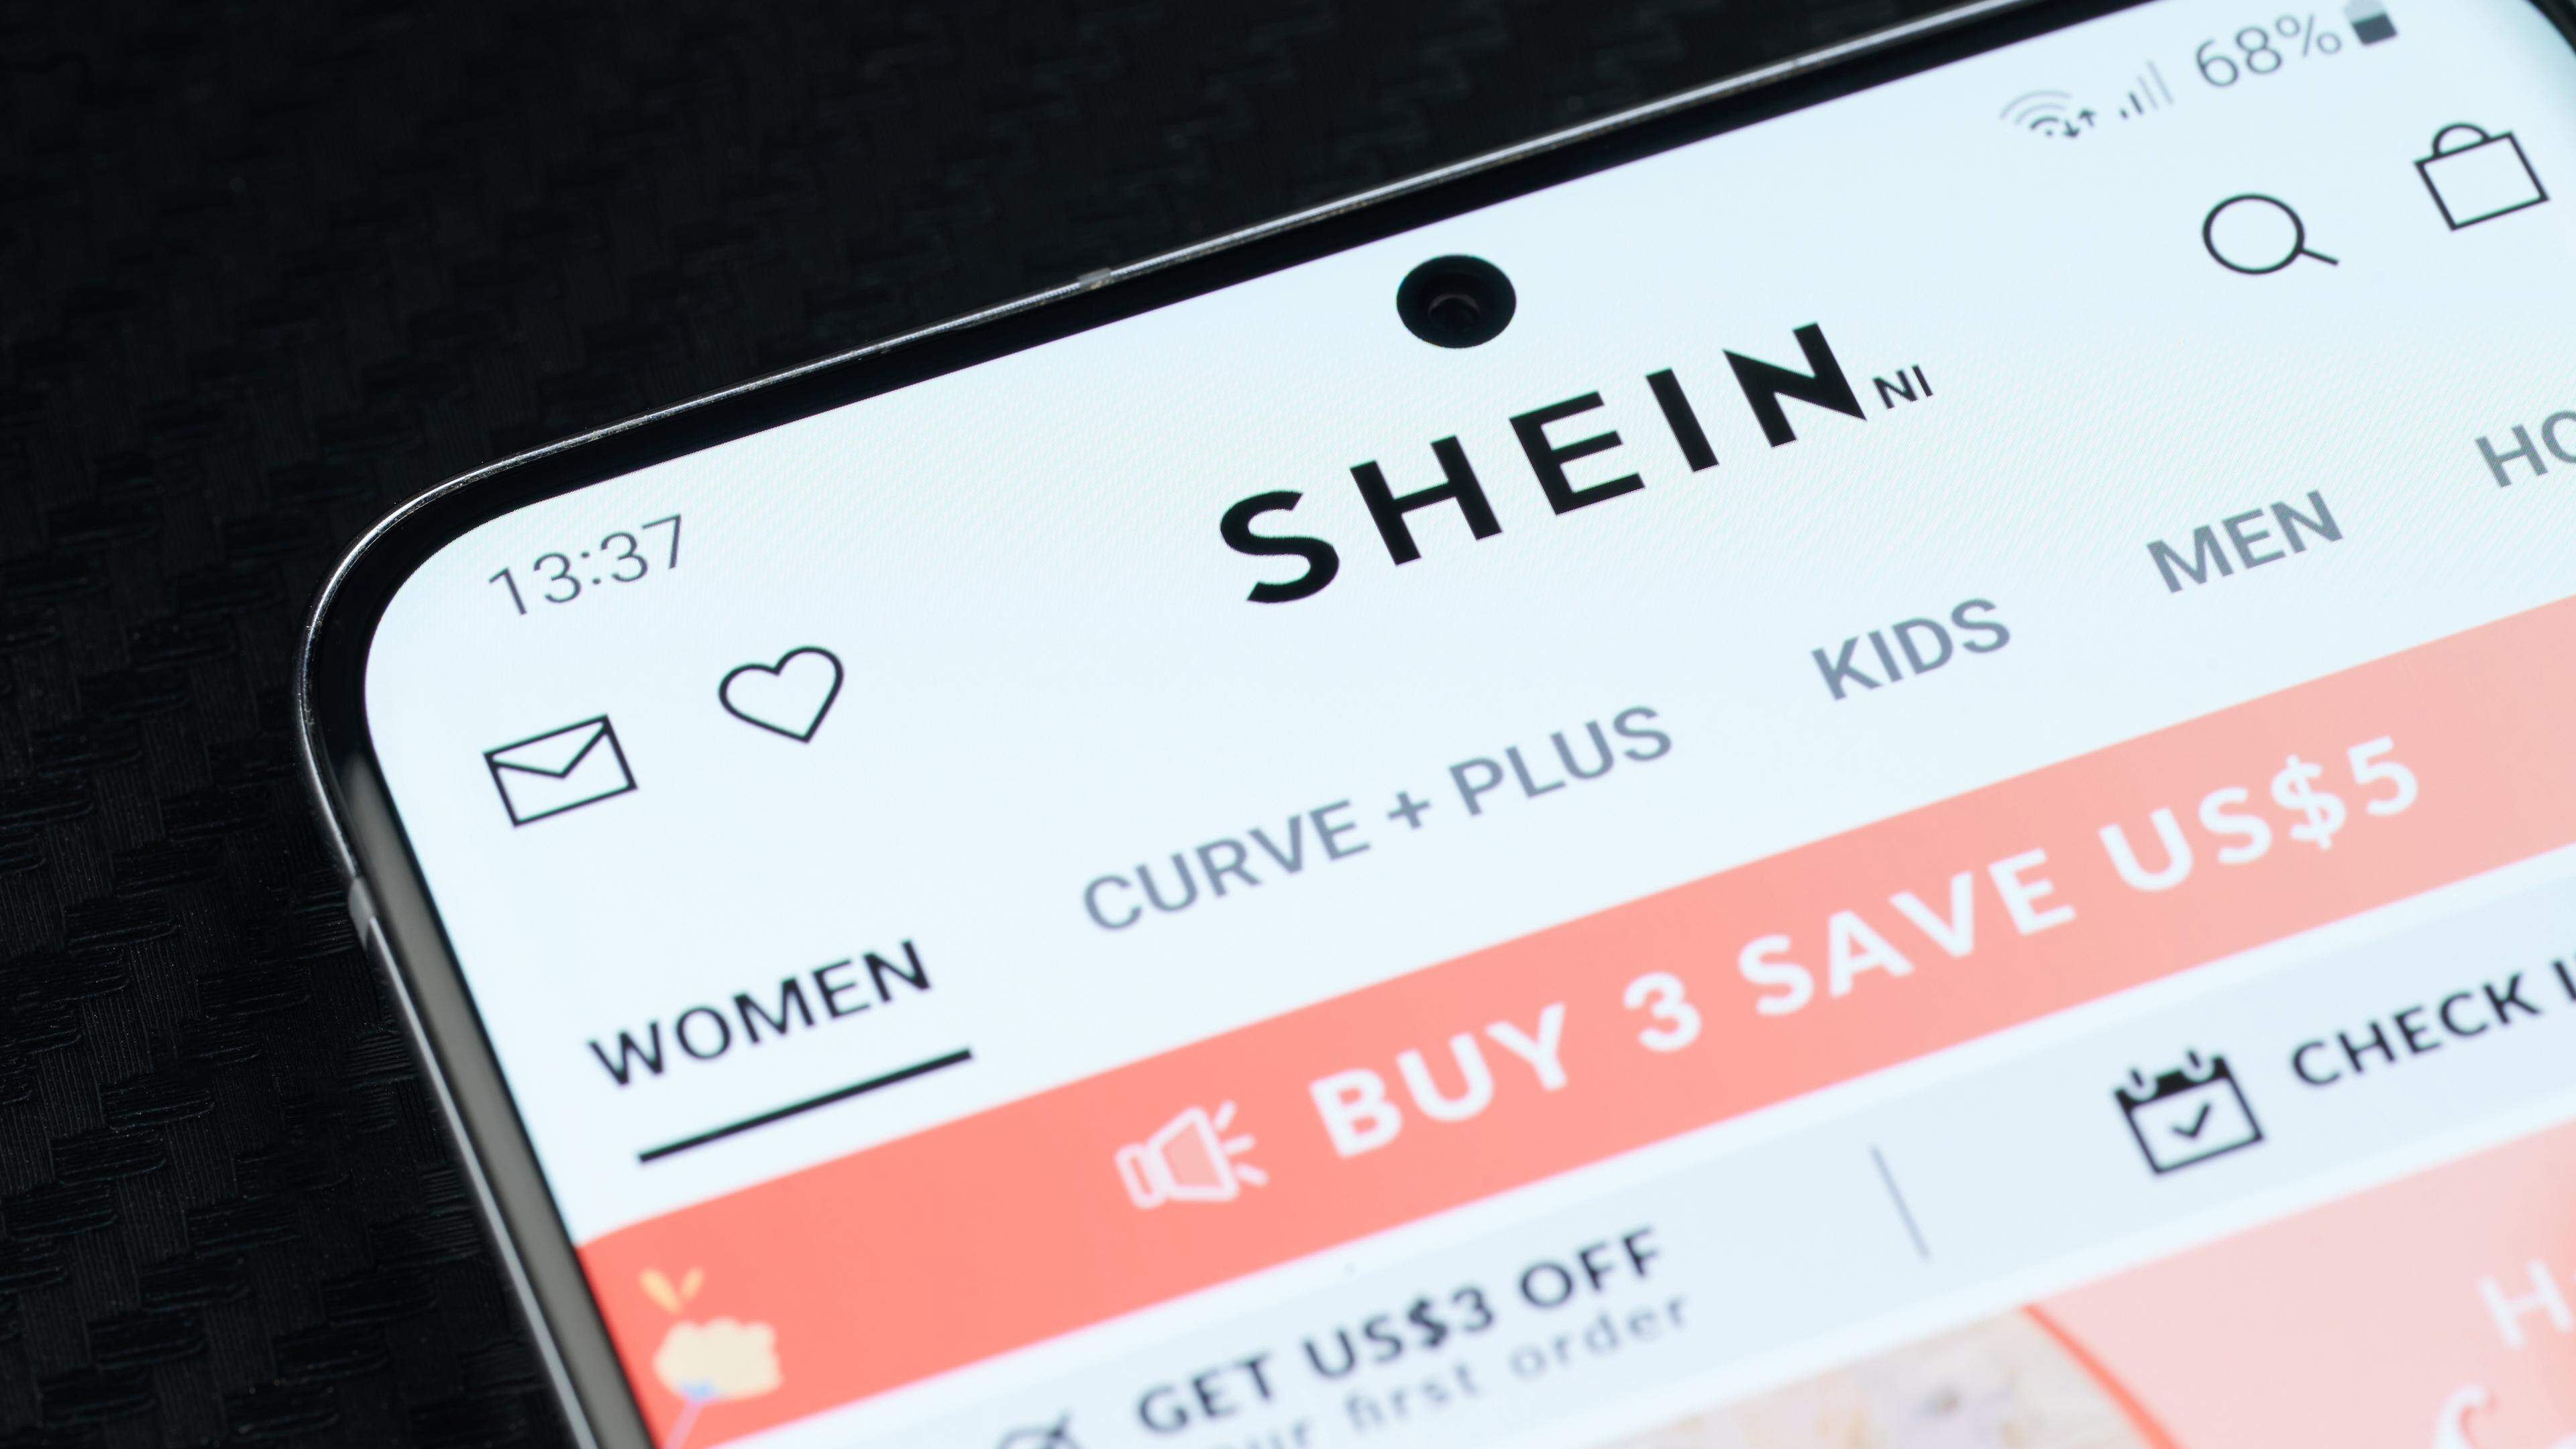 Shein will need to follow the same rules as Facebook, Youtube and AliExpress